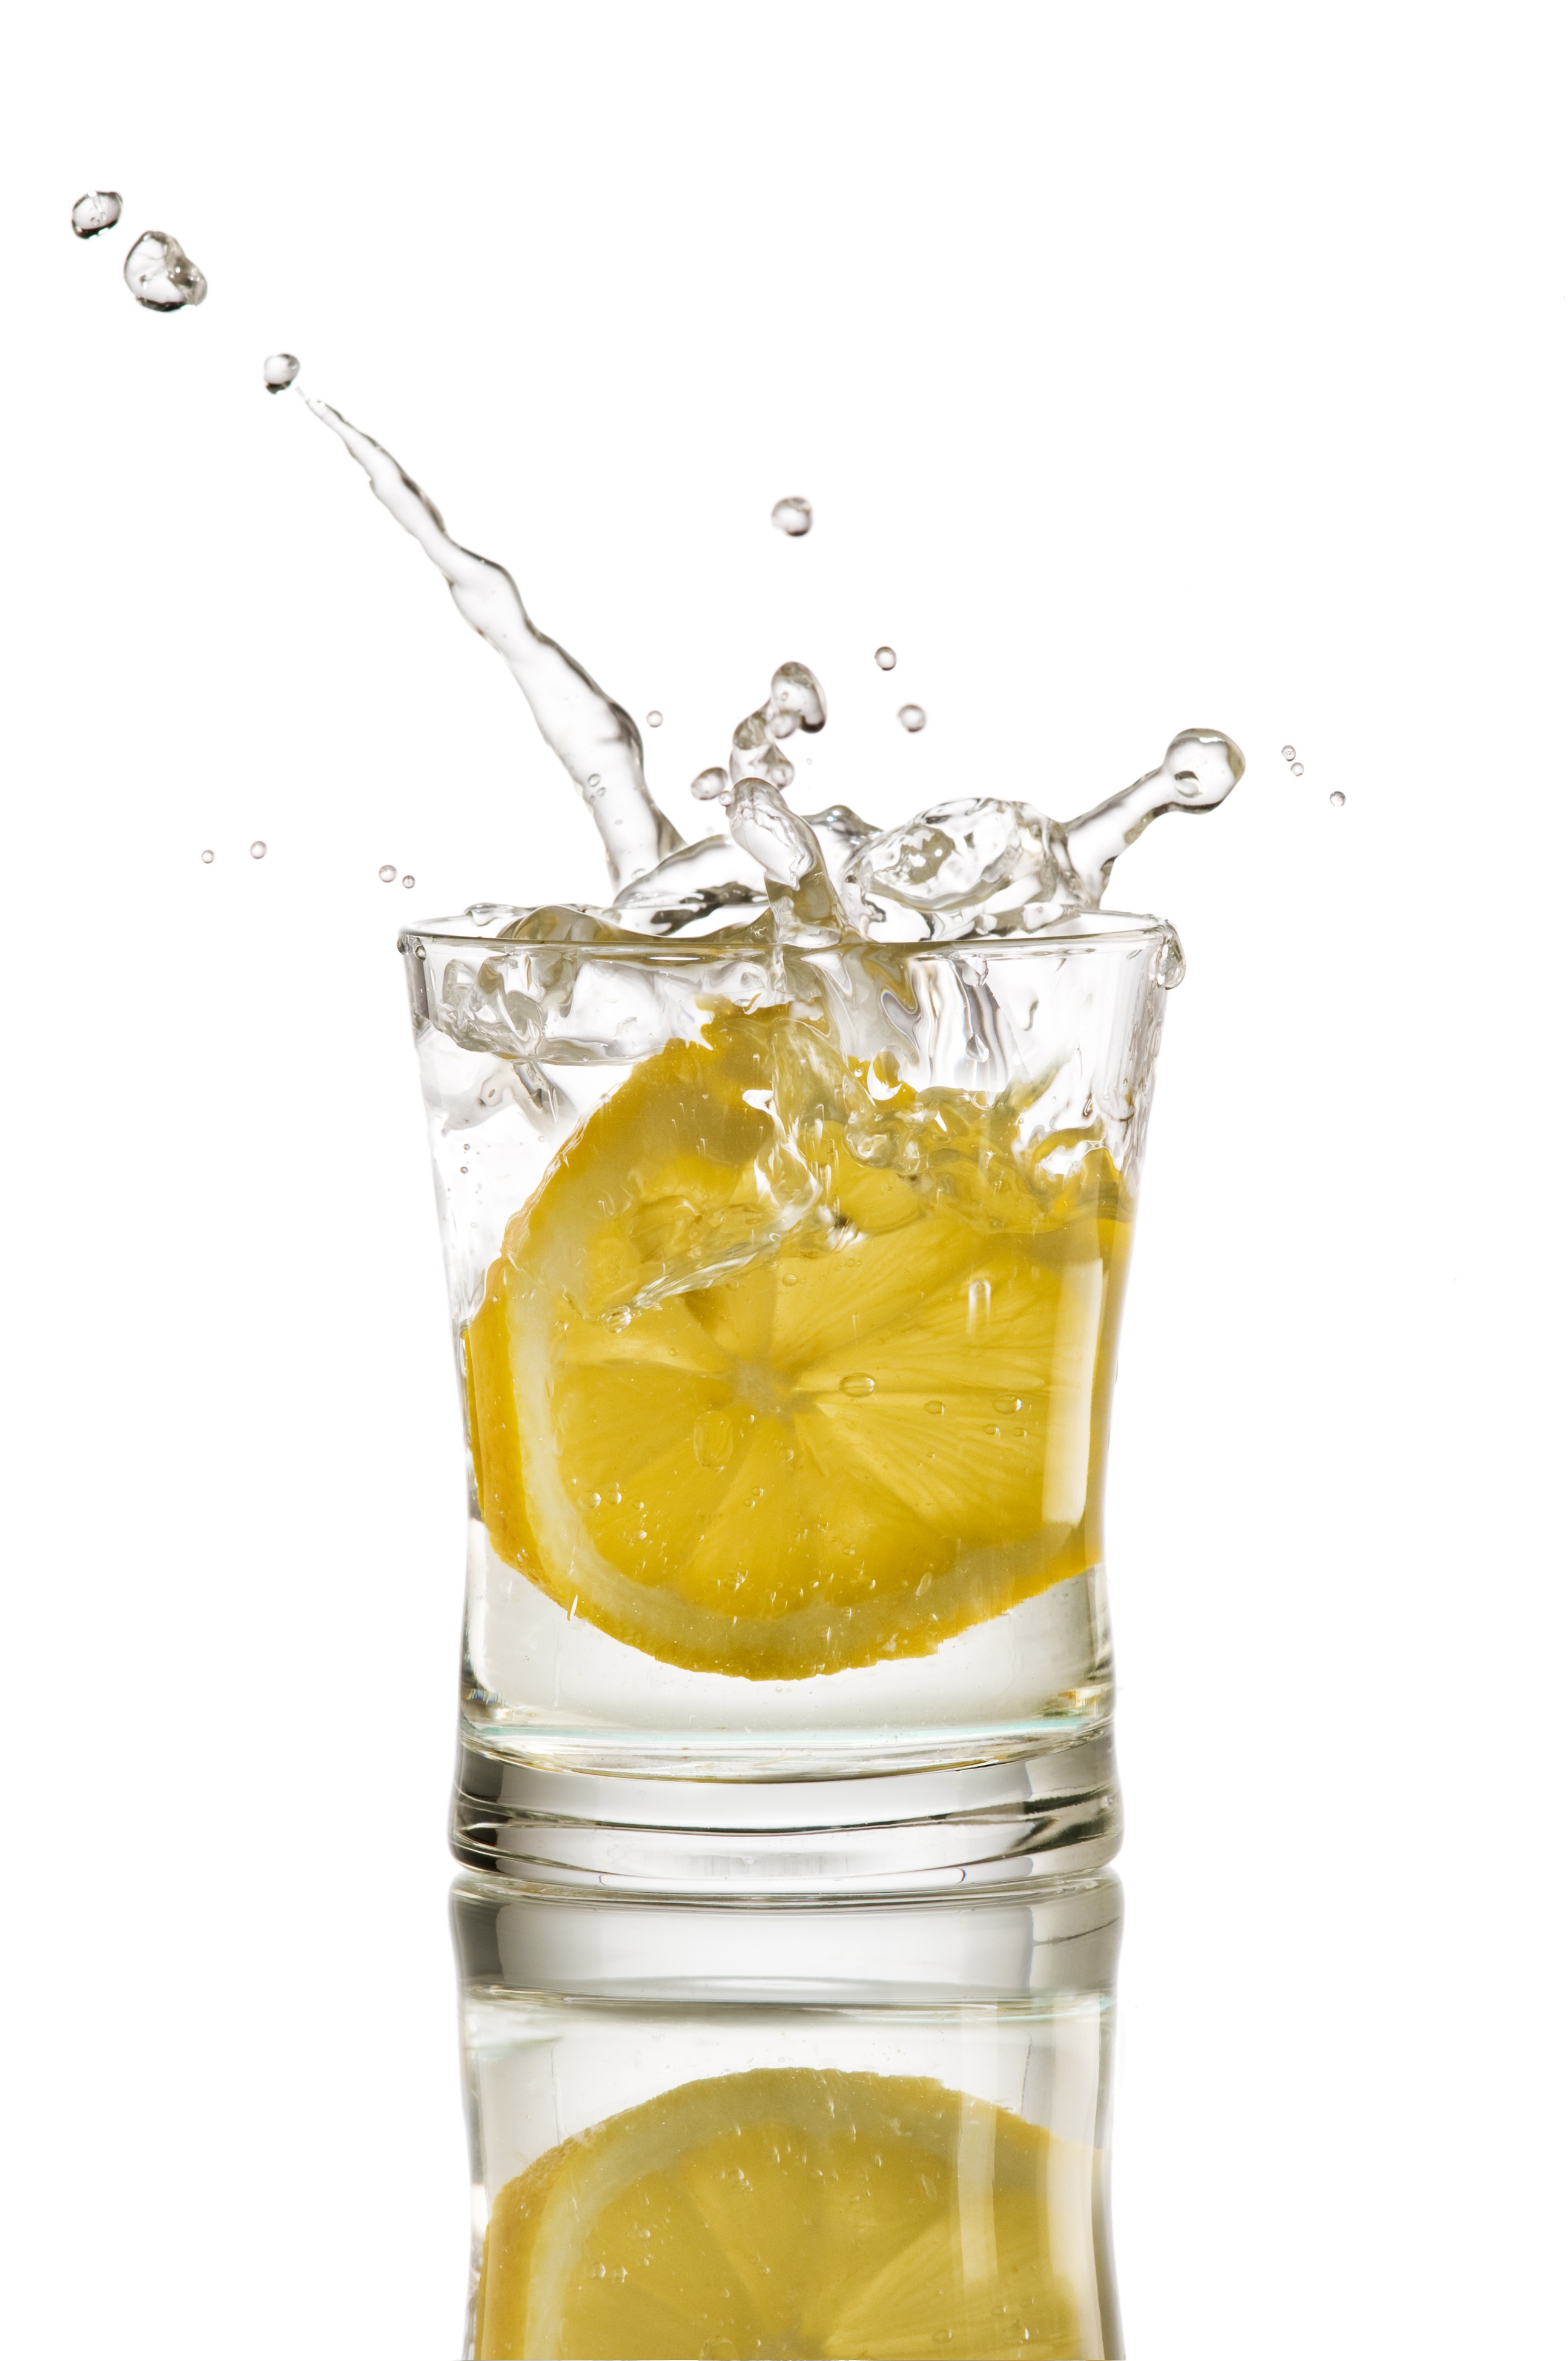 Why lemon water is good for you